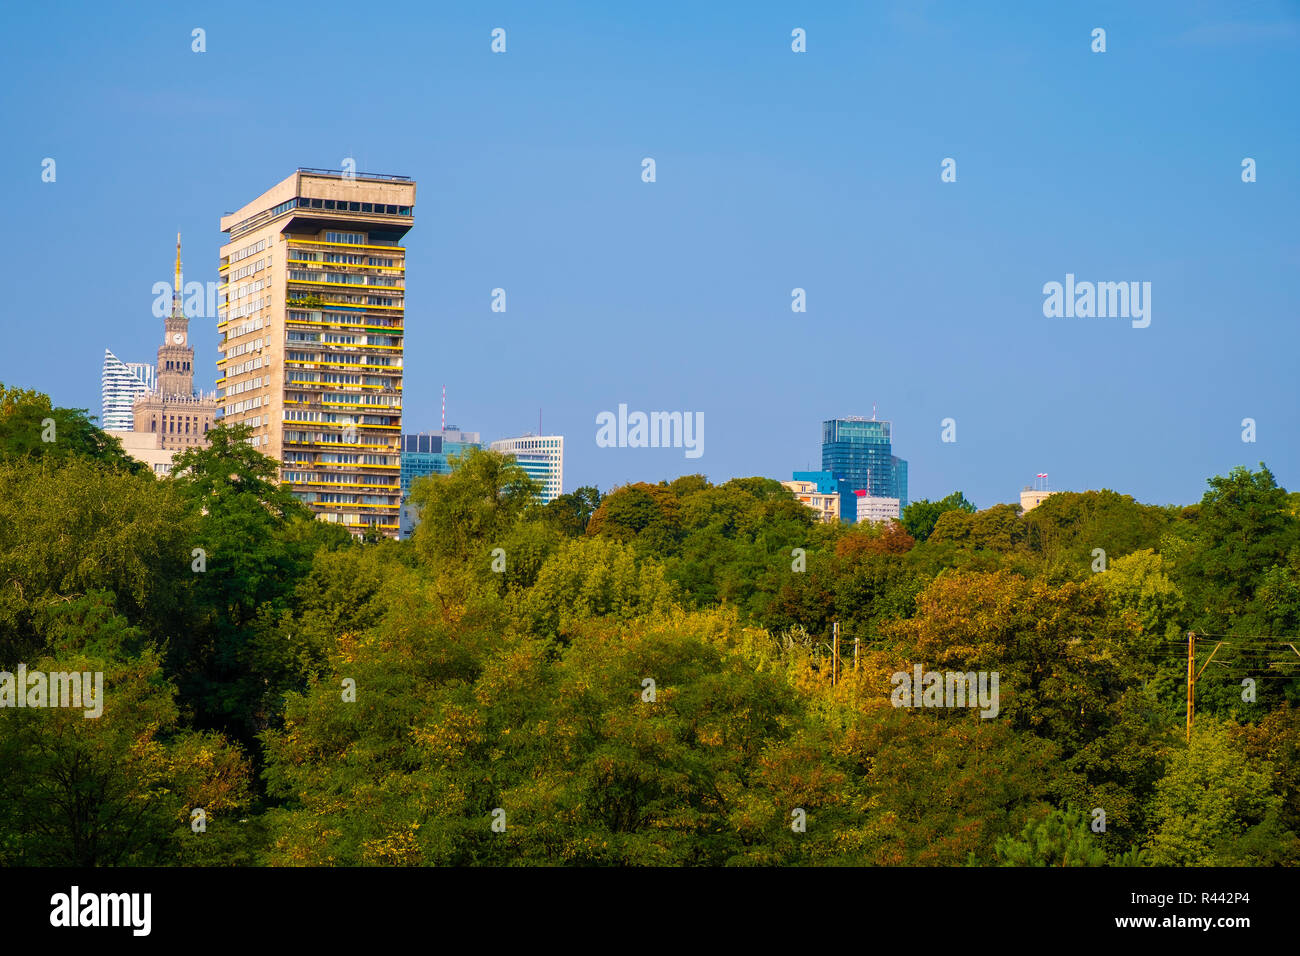 Warsaw, Mazovia / Poland - 2018/09/02: Exterior of the historic Smolna 8 tower, communist residential building developed in 70s of XX century in the P Stock Photo